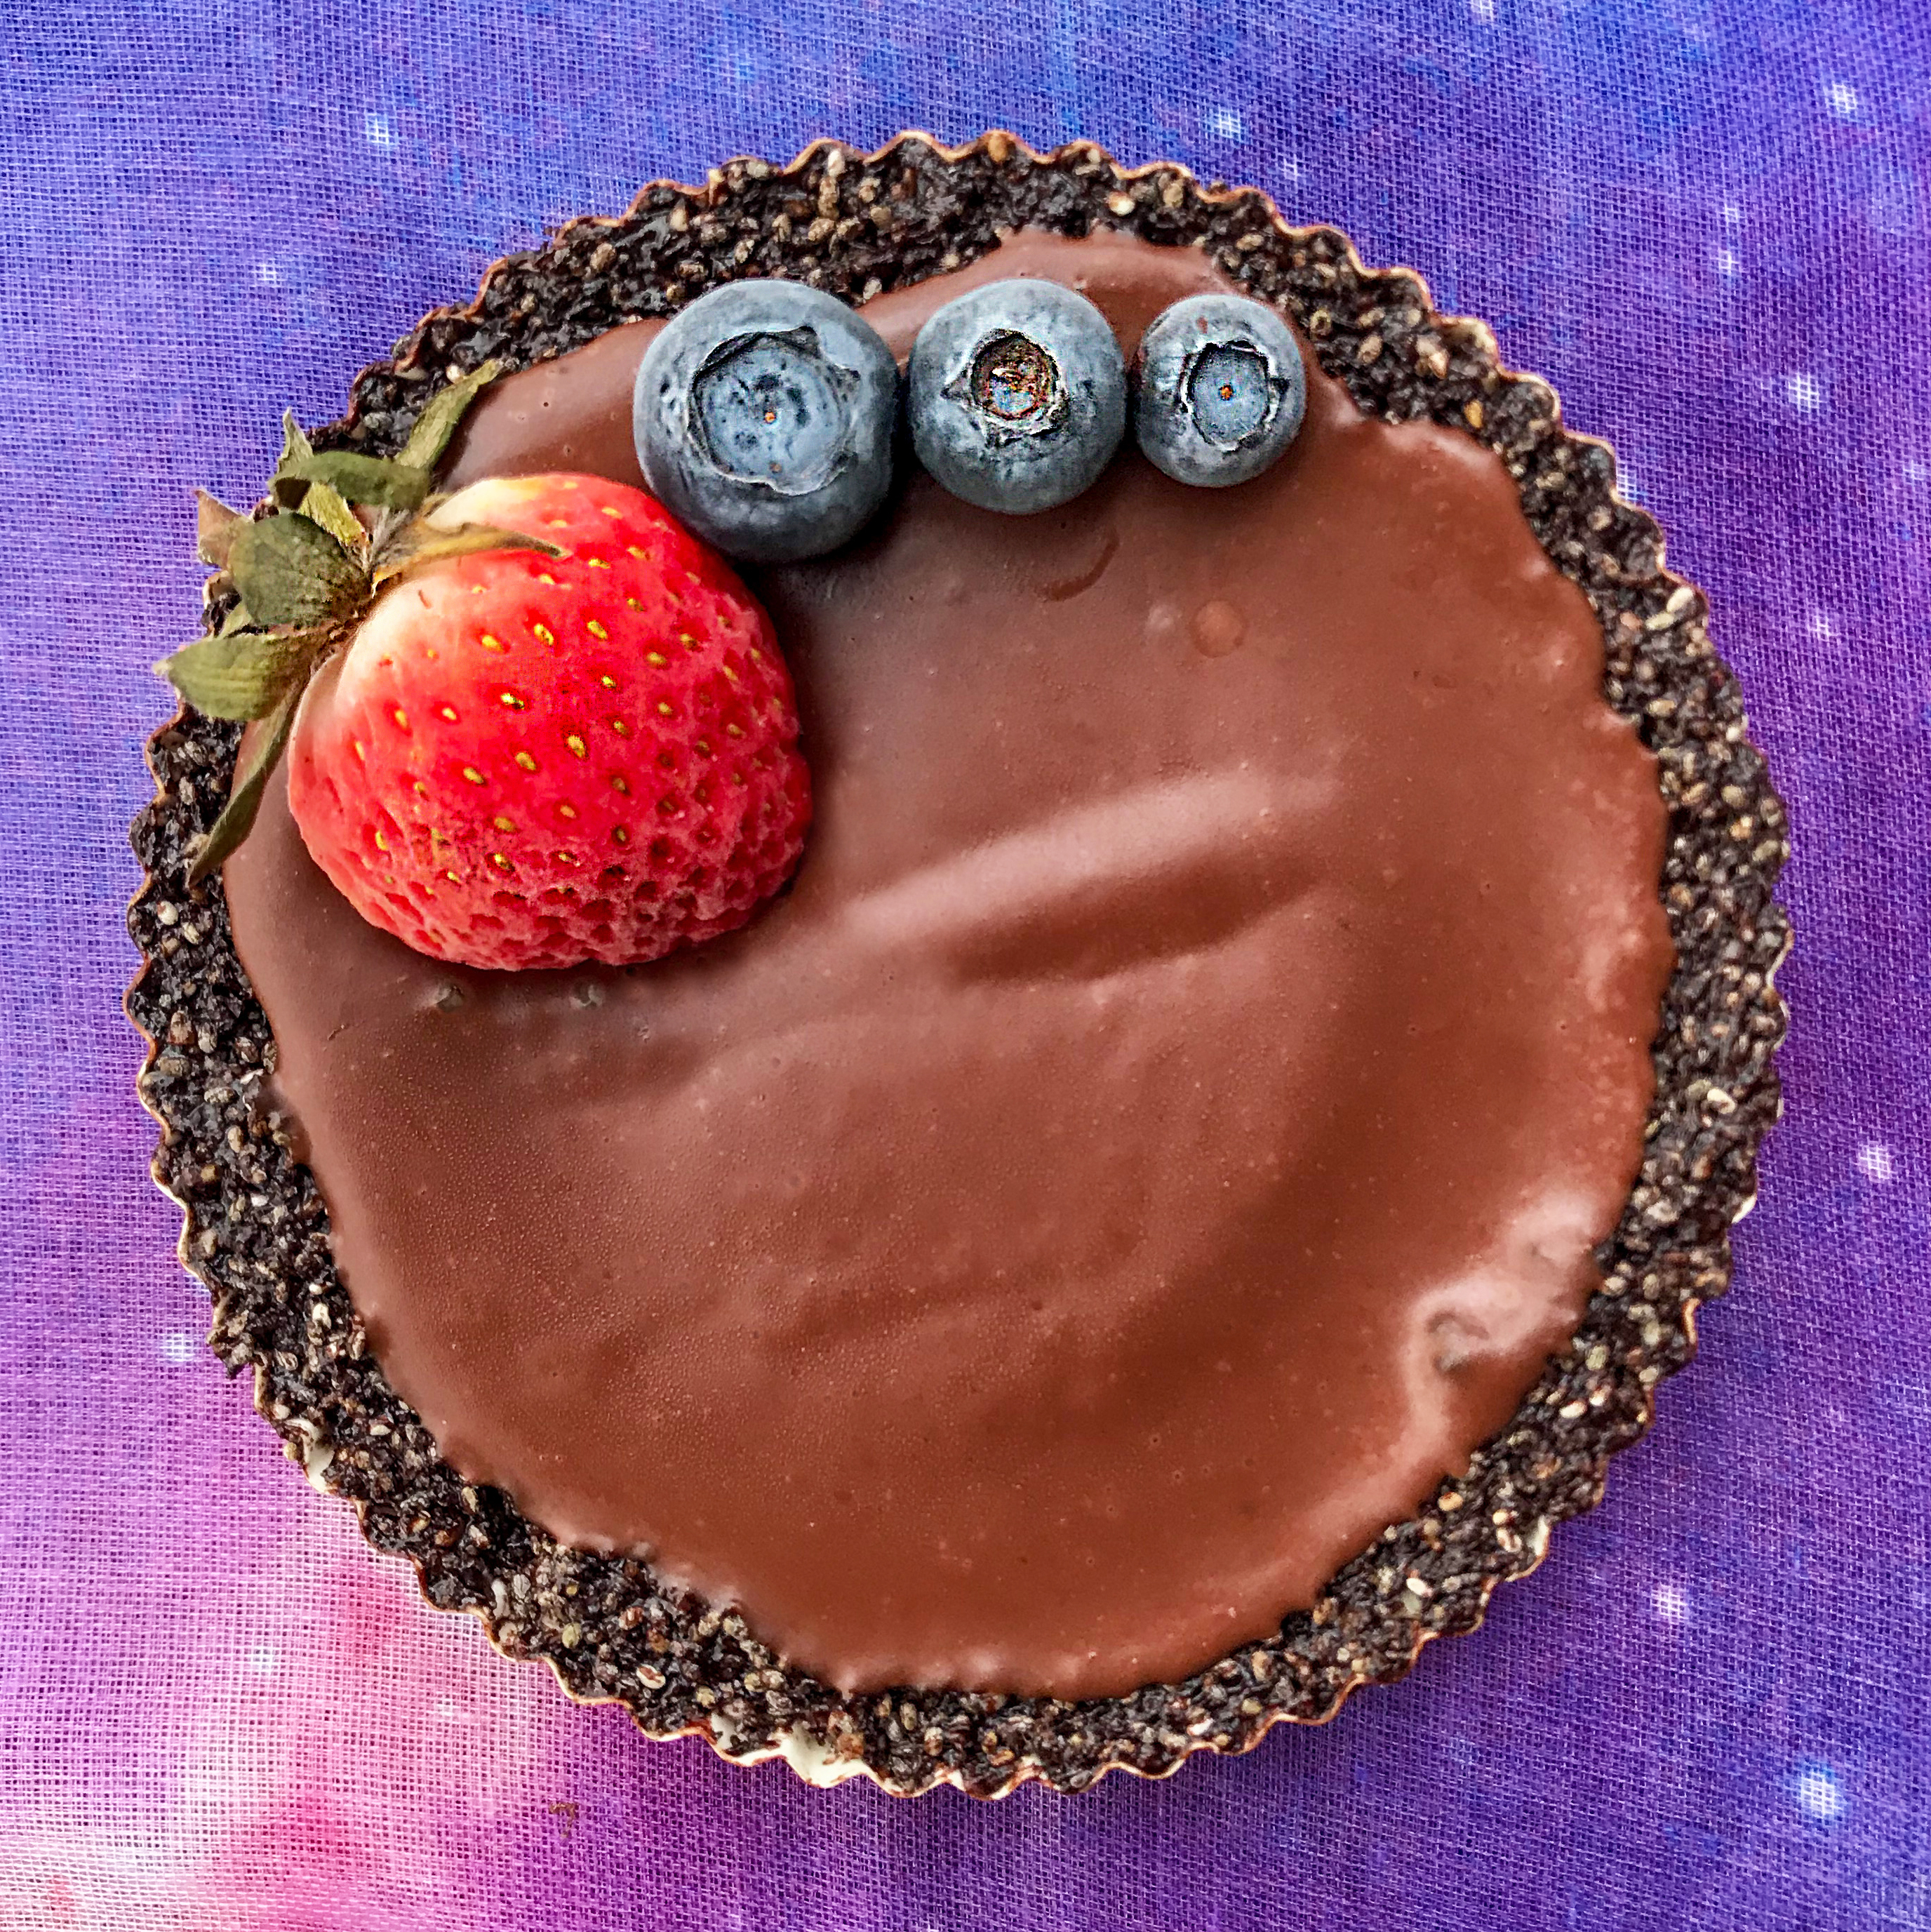 A round 4-inch vegan chocolate tarte with a cashew-chia seed crust, plus a strawberry and 3 blueberries as a garnish.